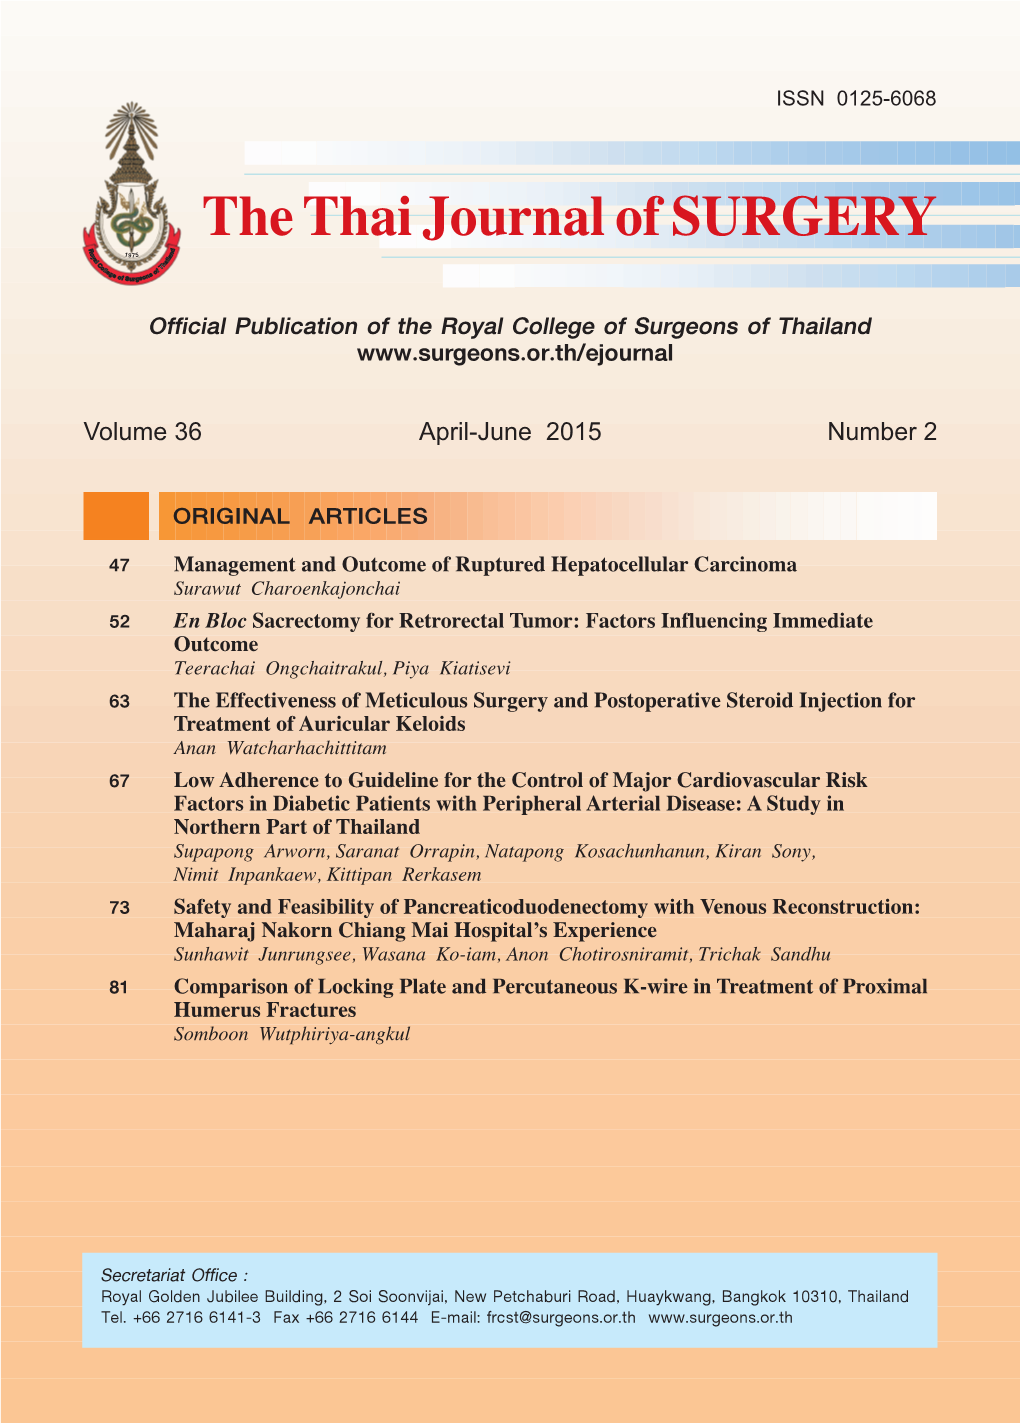 Management and Outcome of Ruptured Hepatocellular Carcinoma